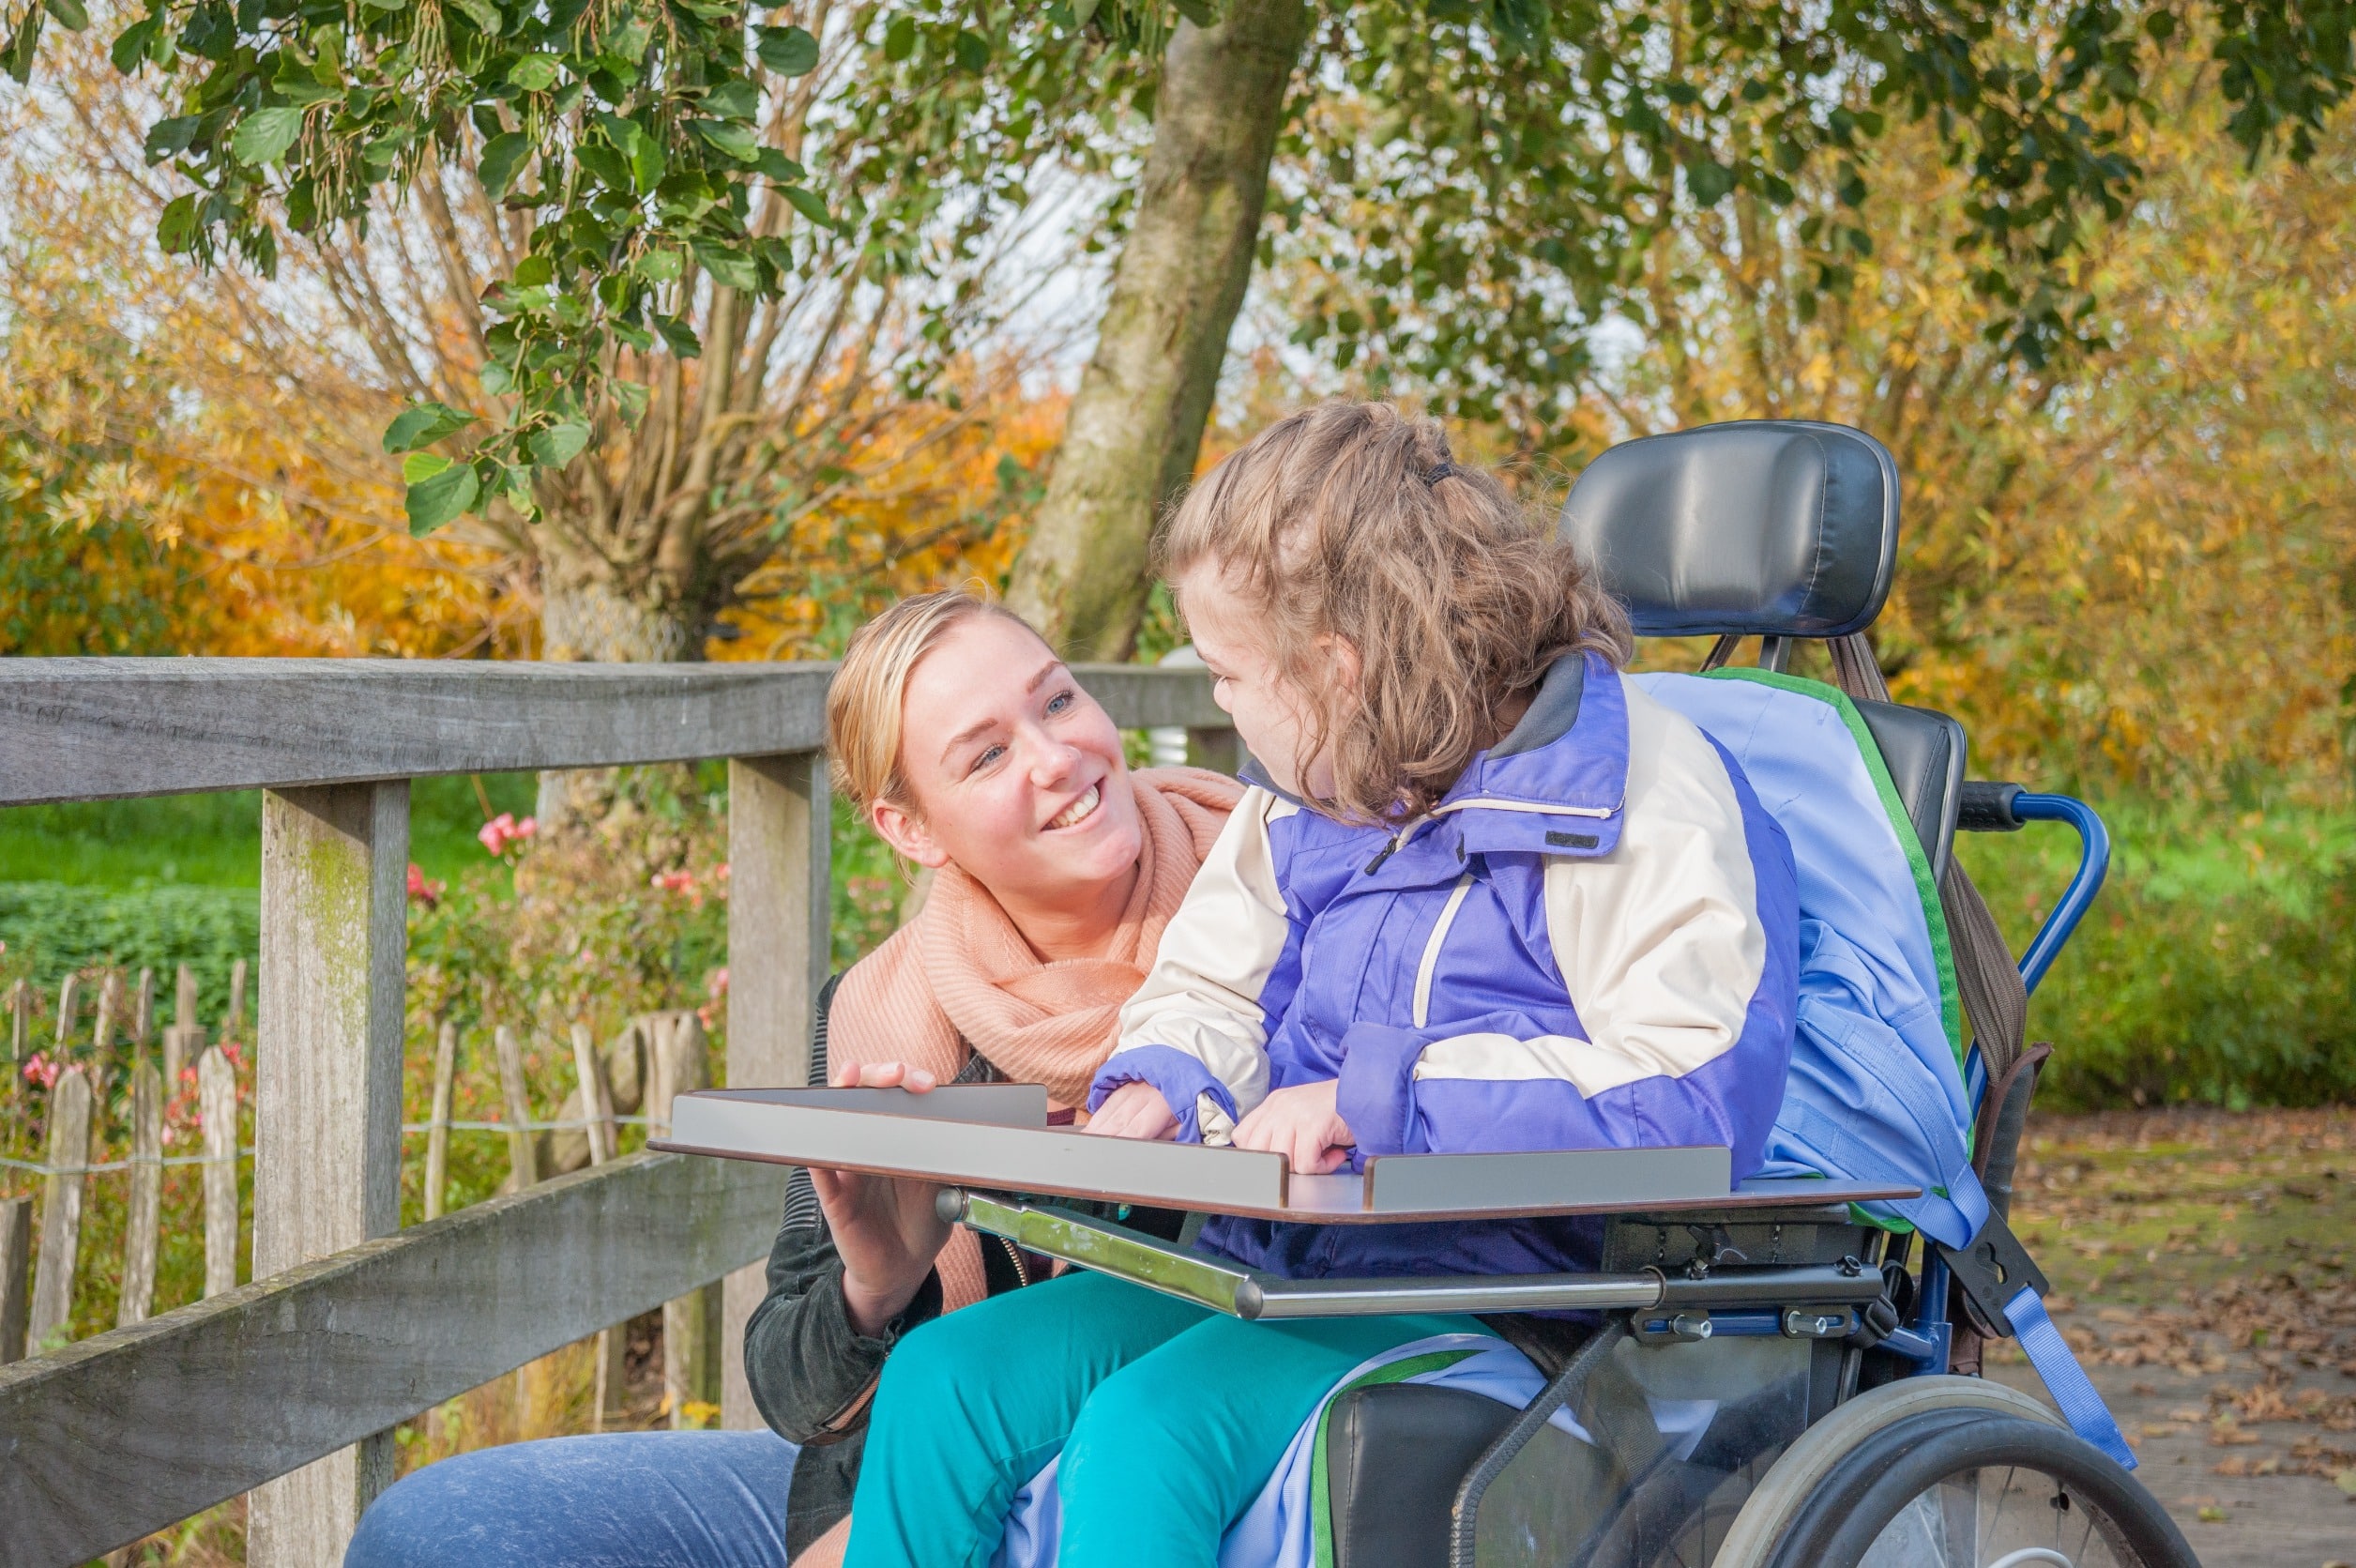 Child seated in wheelchair looking at parent or caregiver